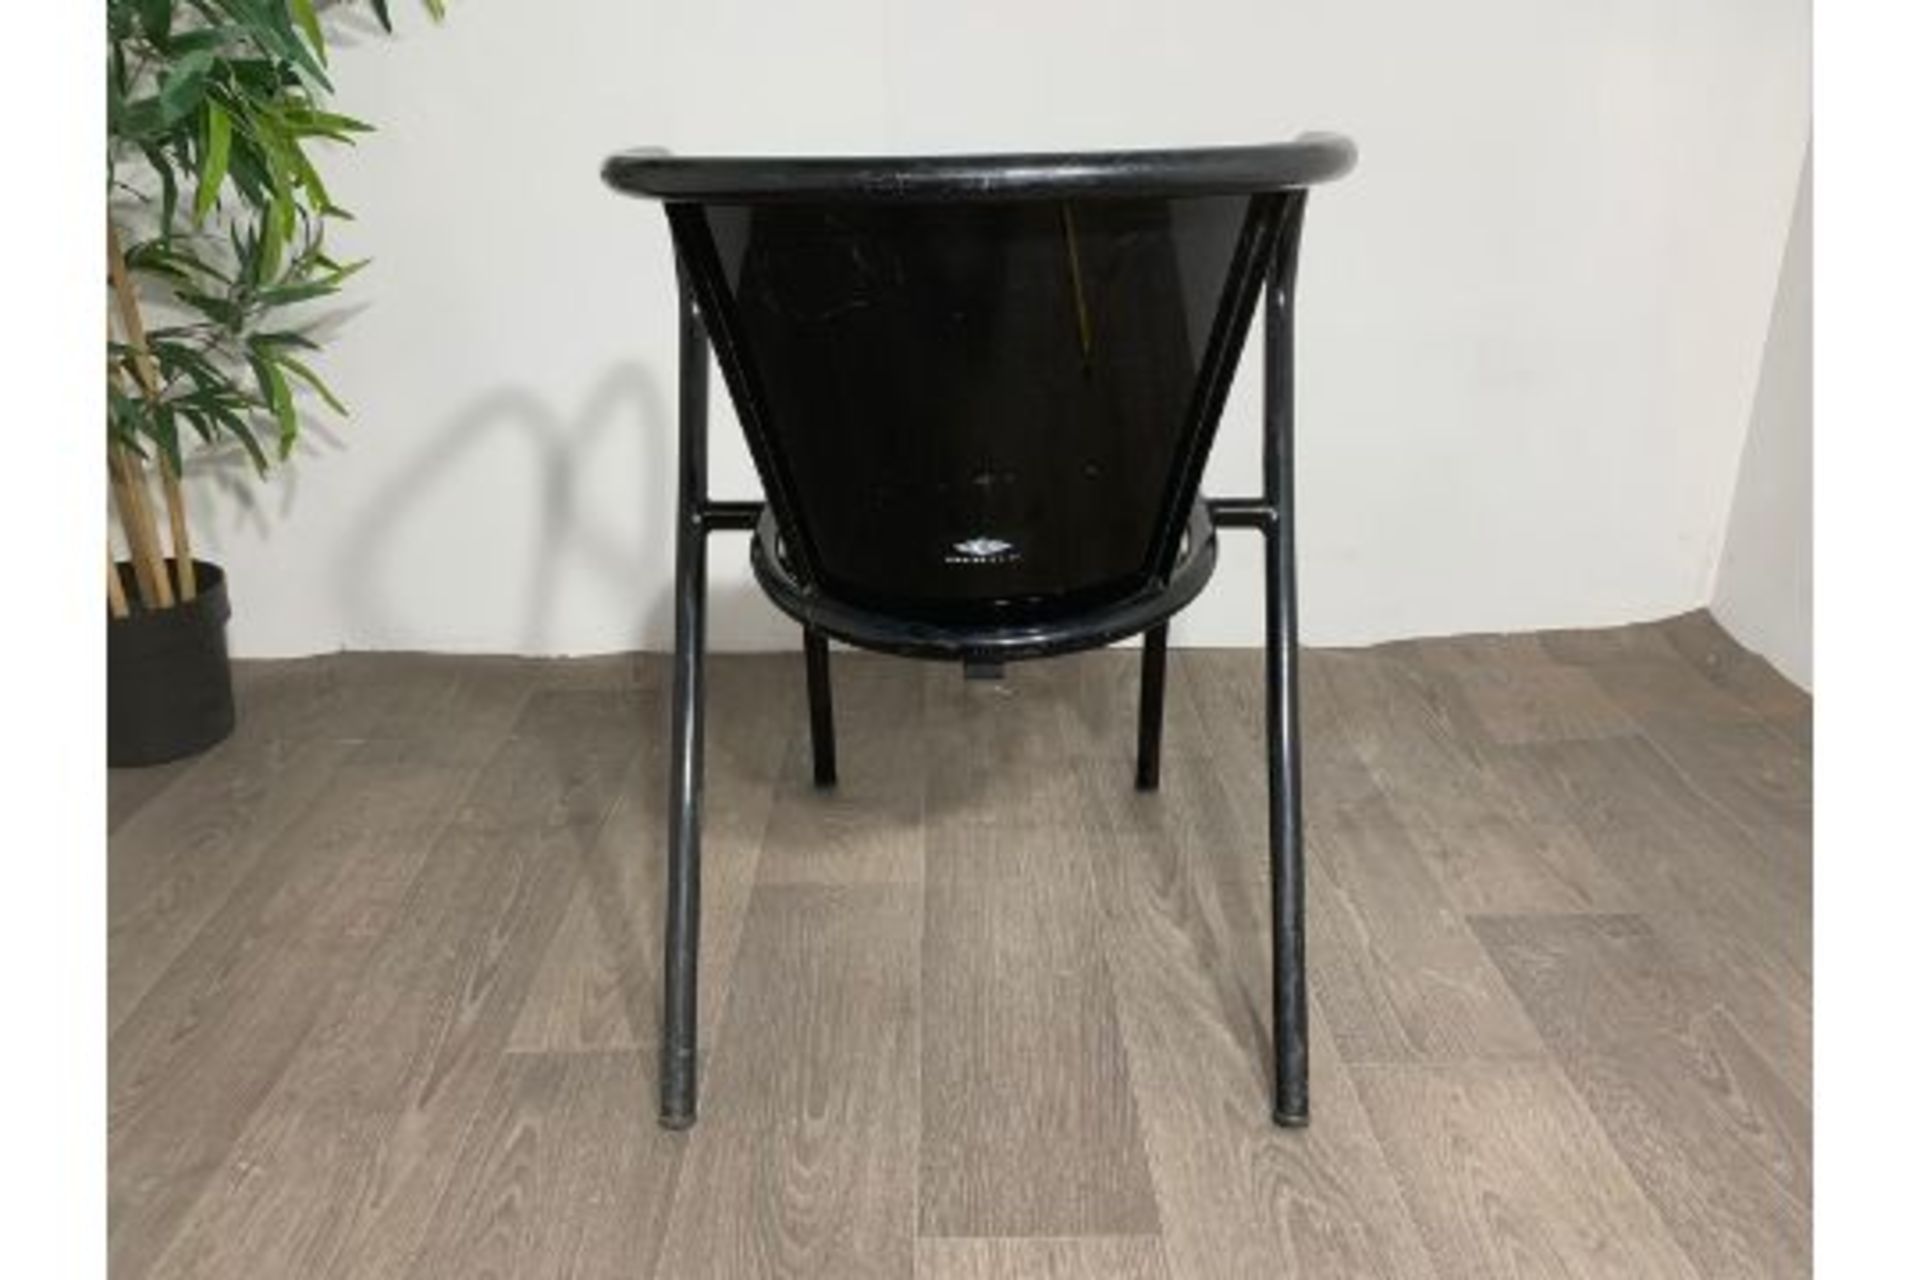 Adico 5008 Black Chair With Wooden Seat x2 - Image 5 of 7